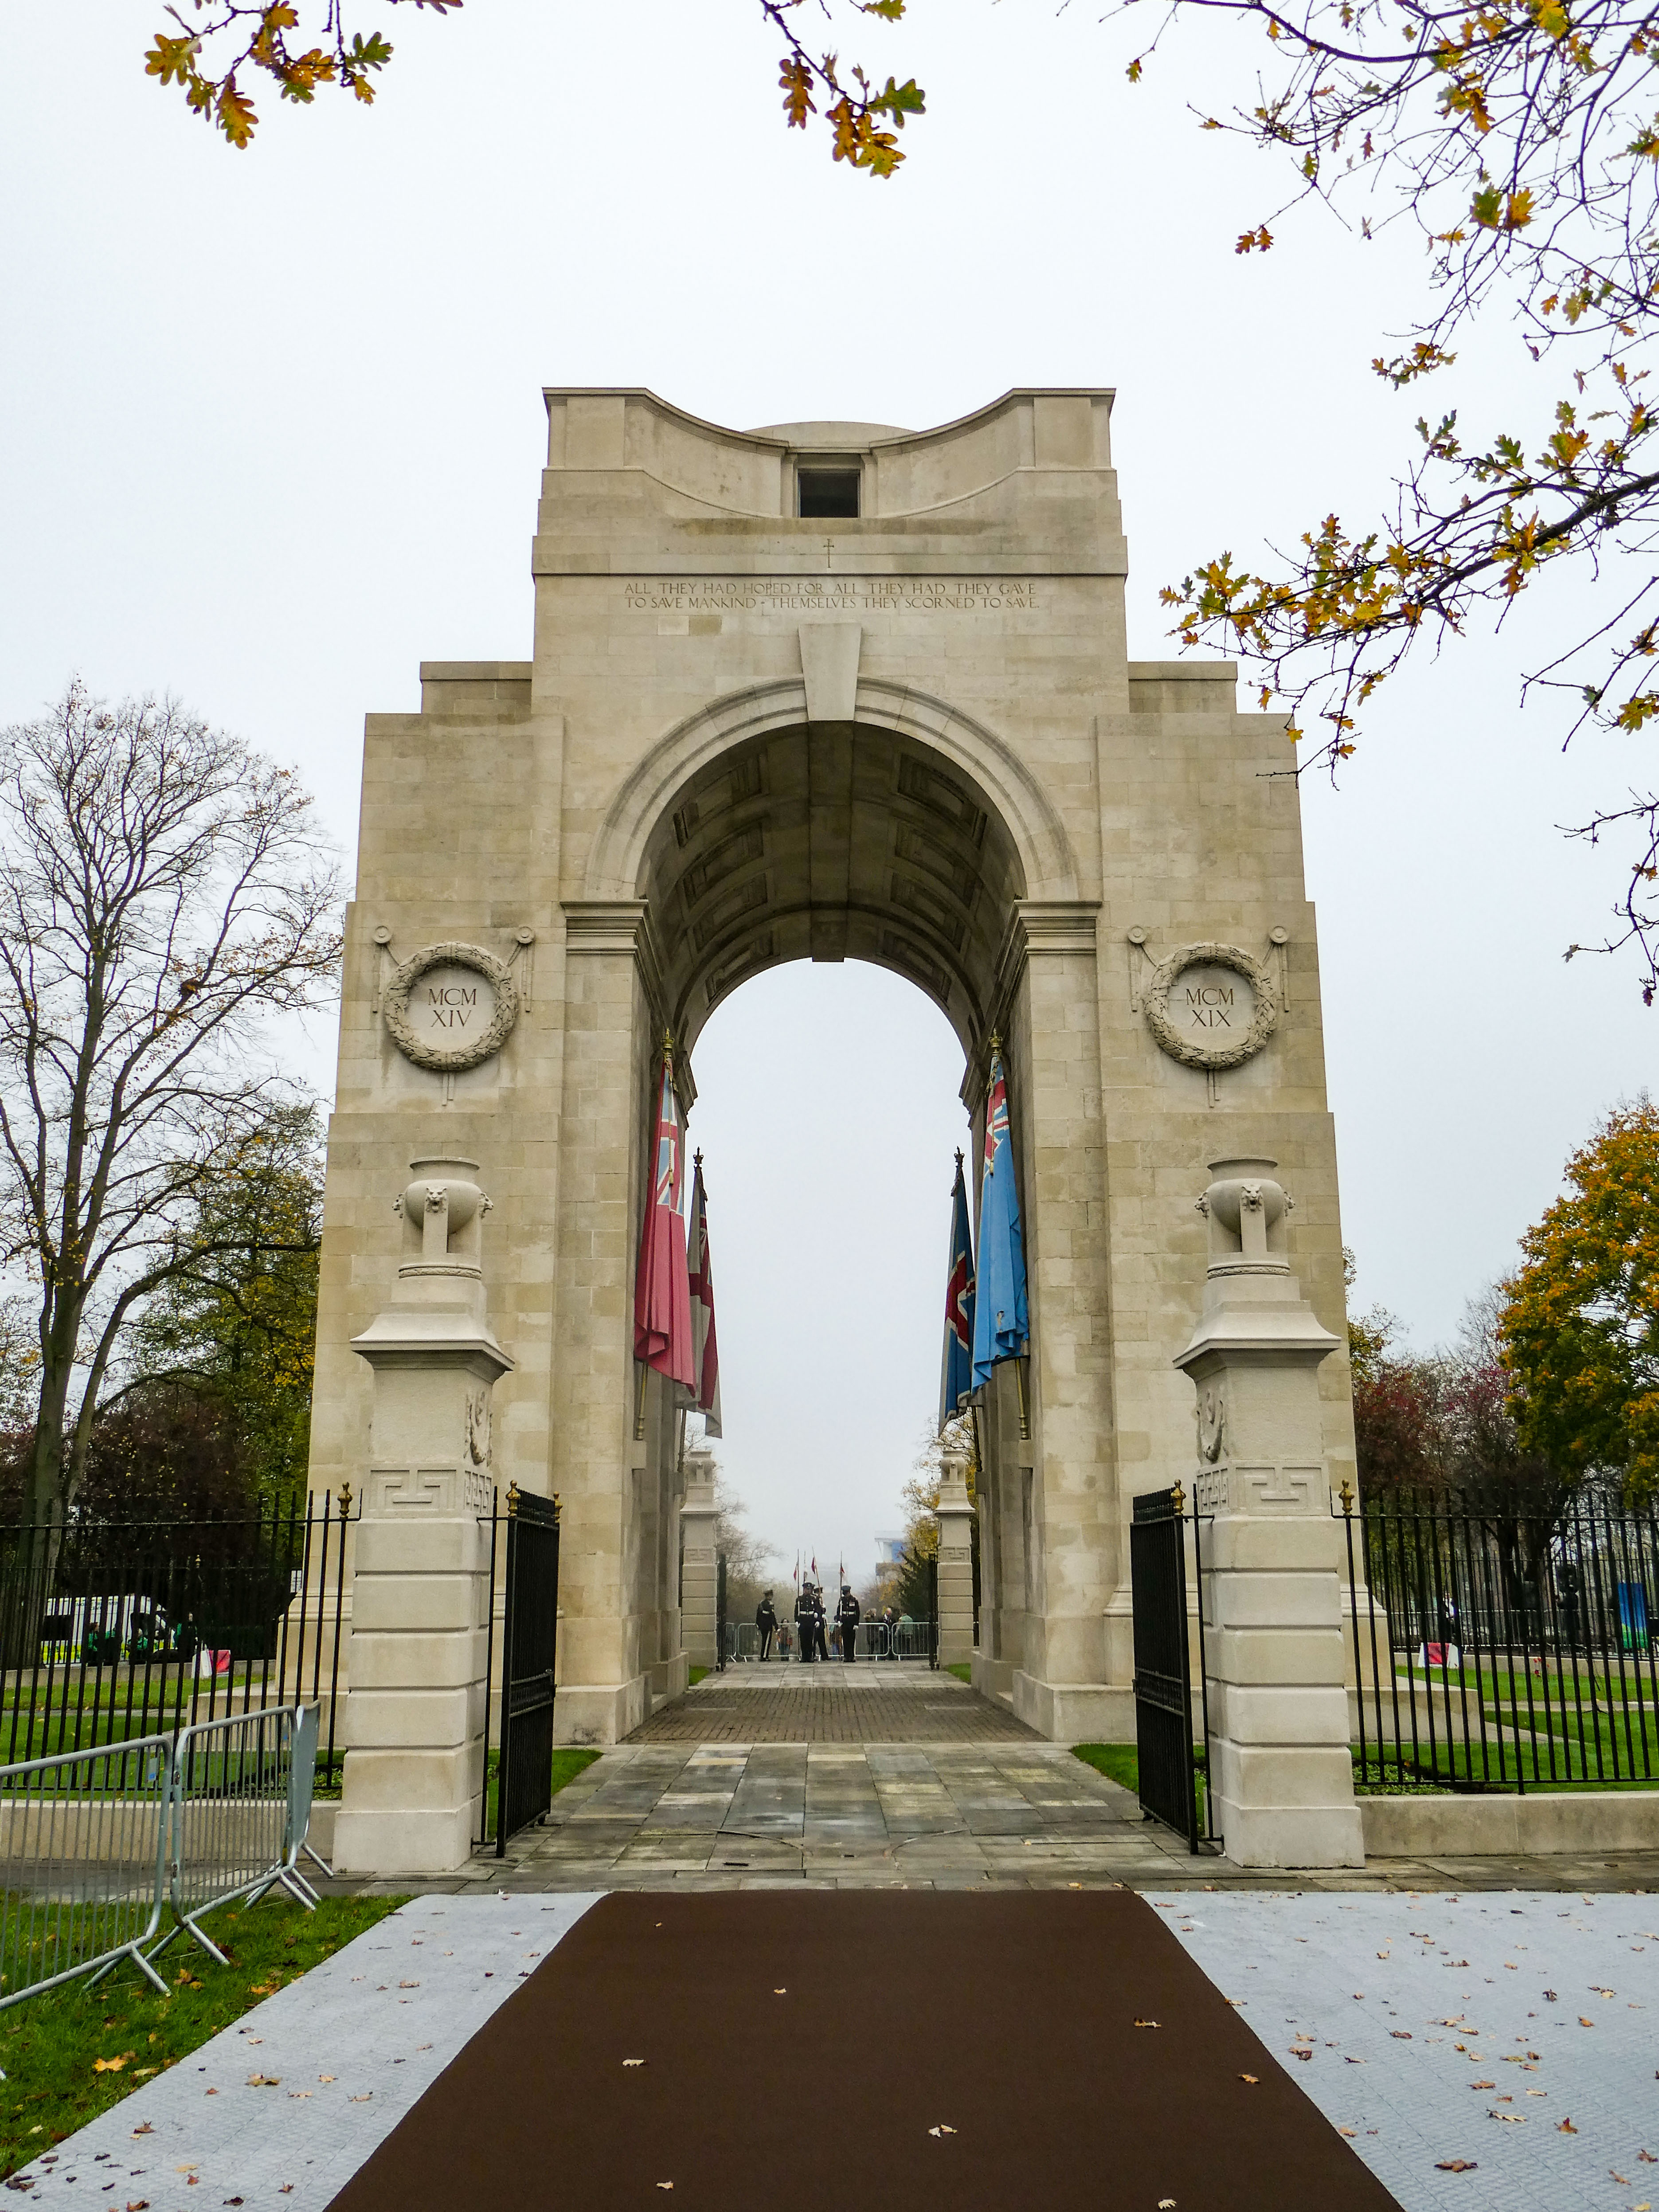 The Arch of Remembrance in Leicester’s Victoria Park on Sunday